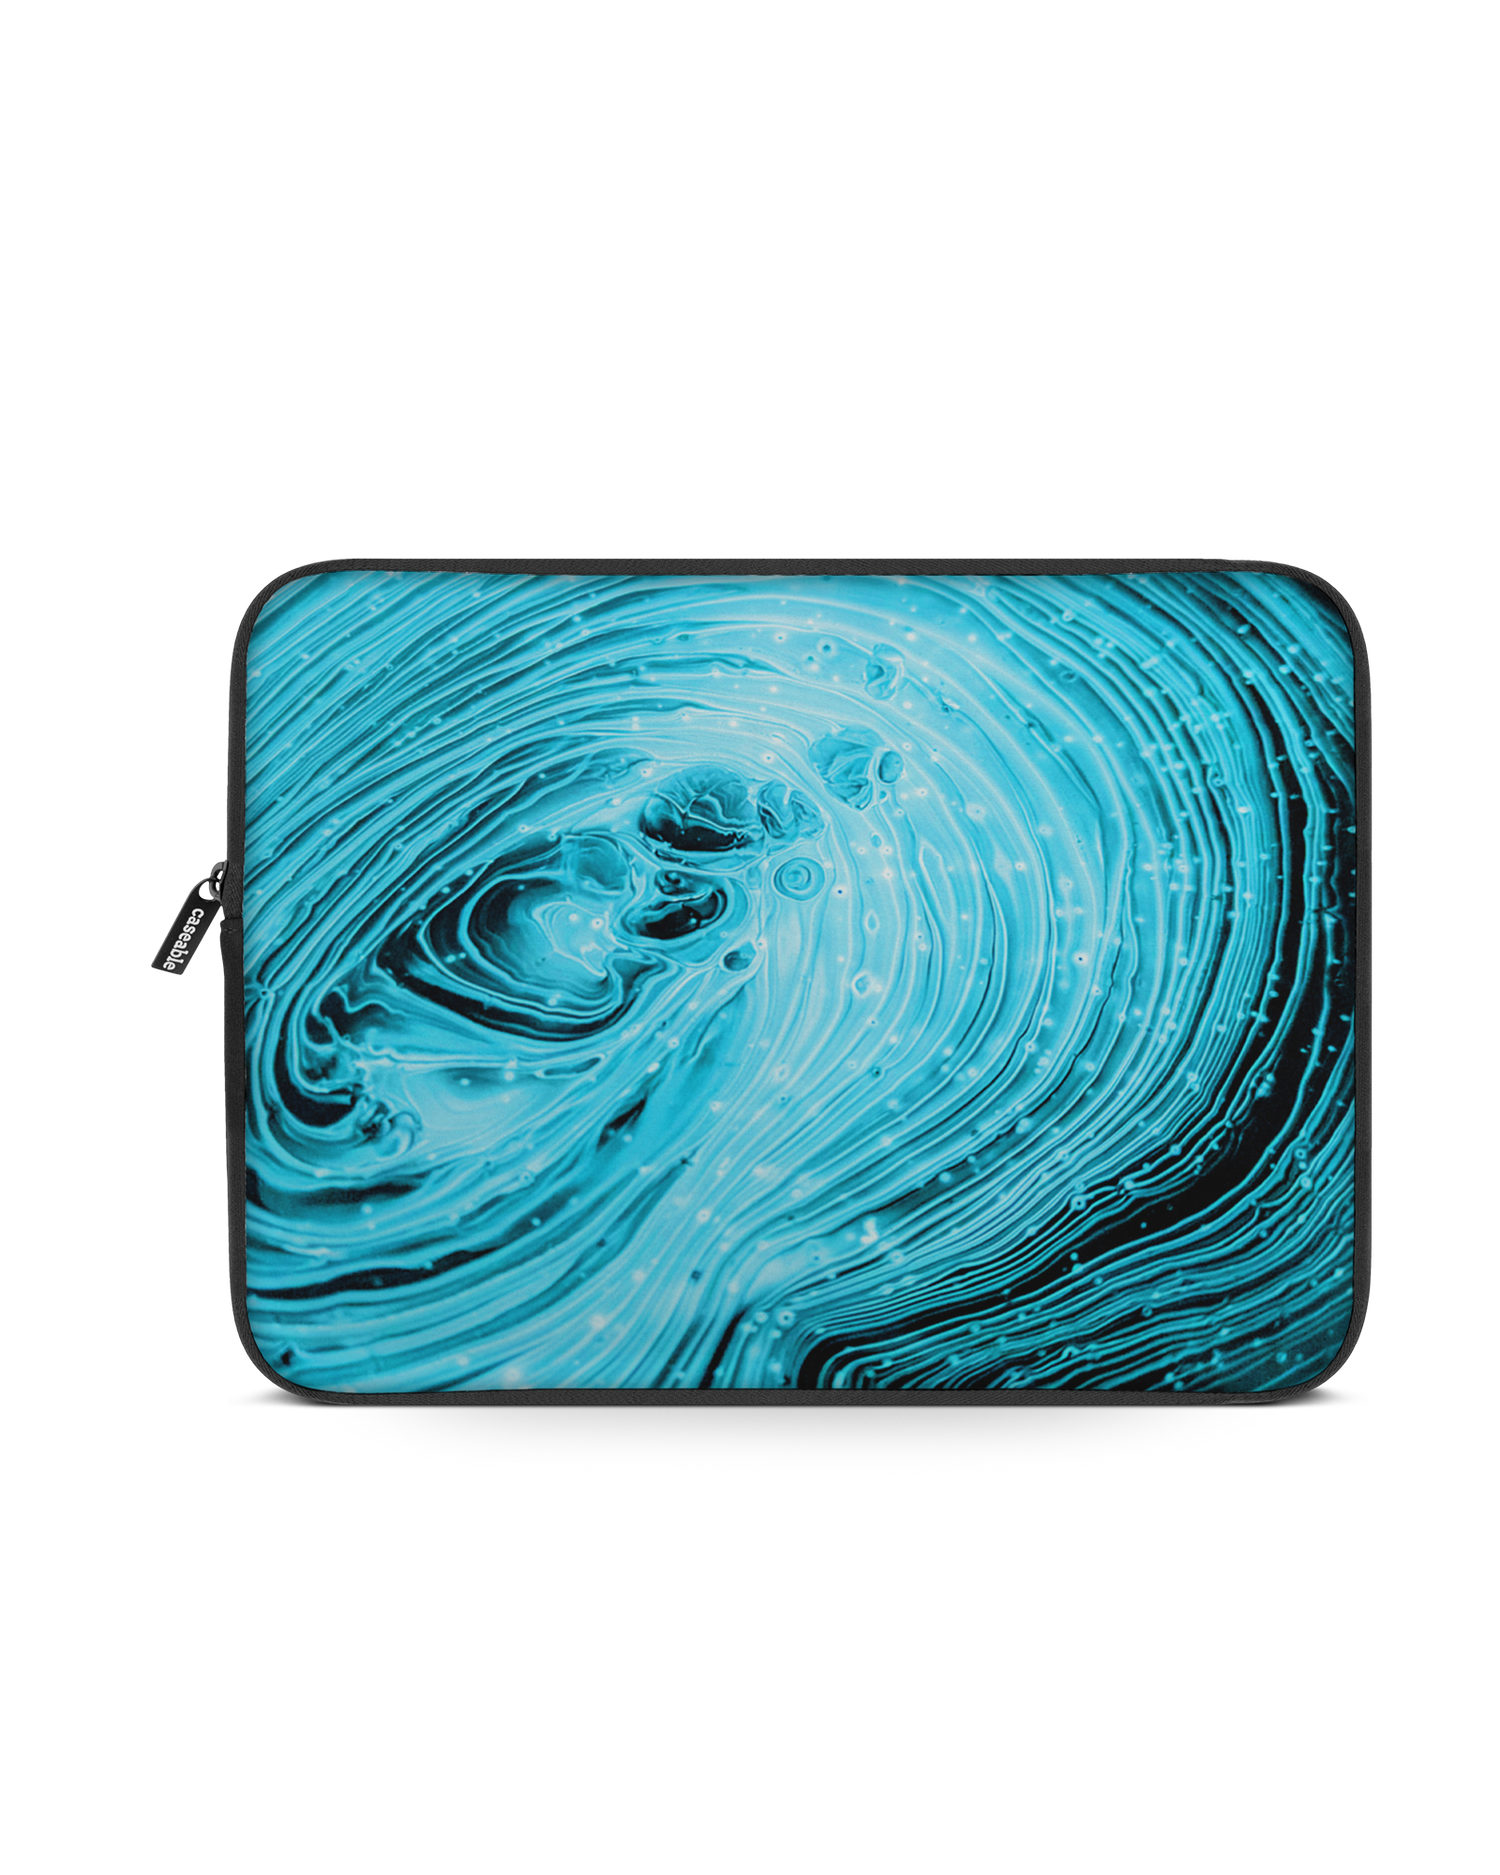 Turquoise Ripples Laptop Case 13 inch: Front View